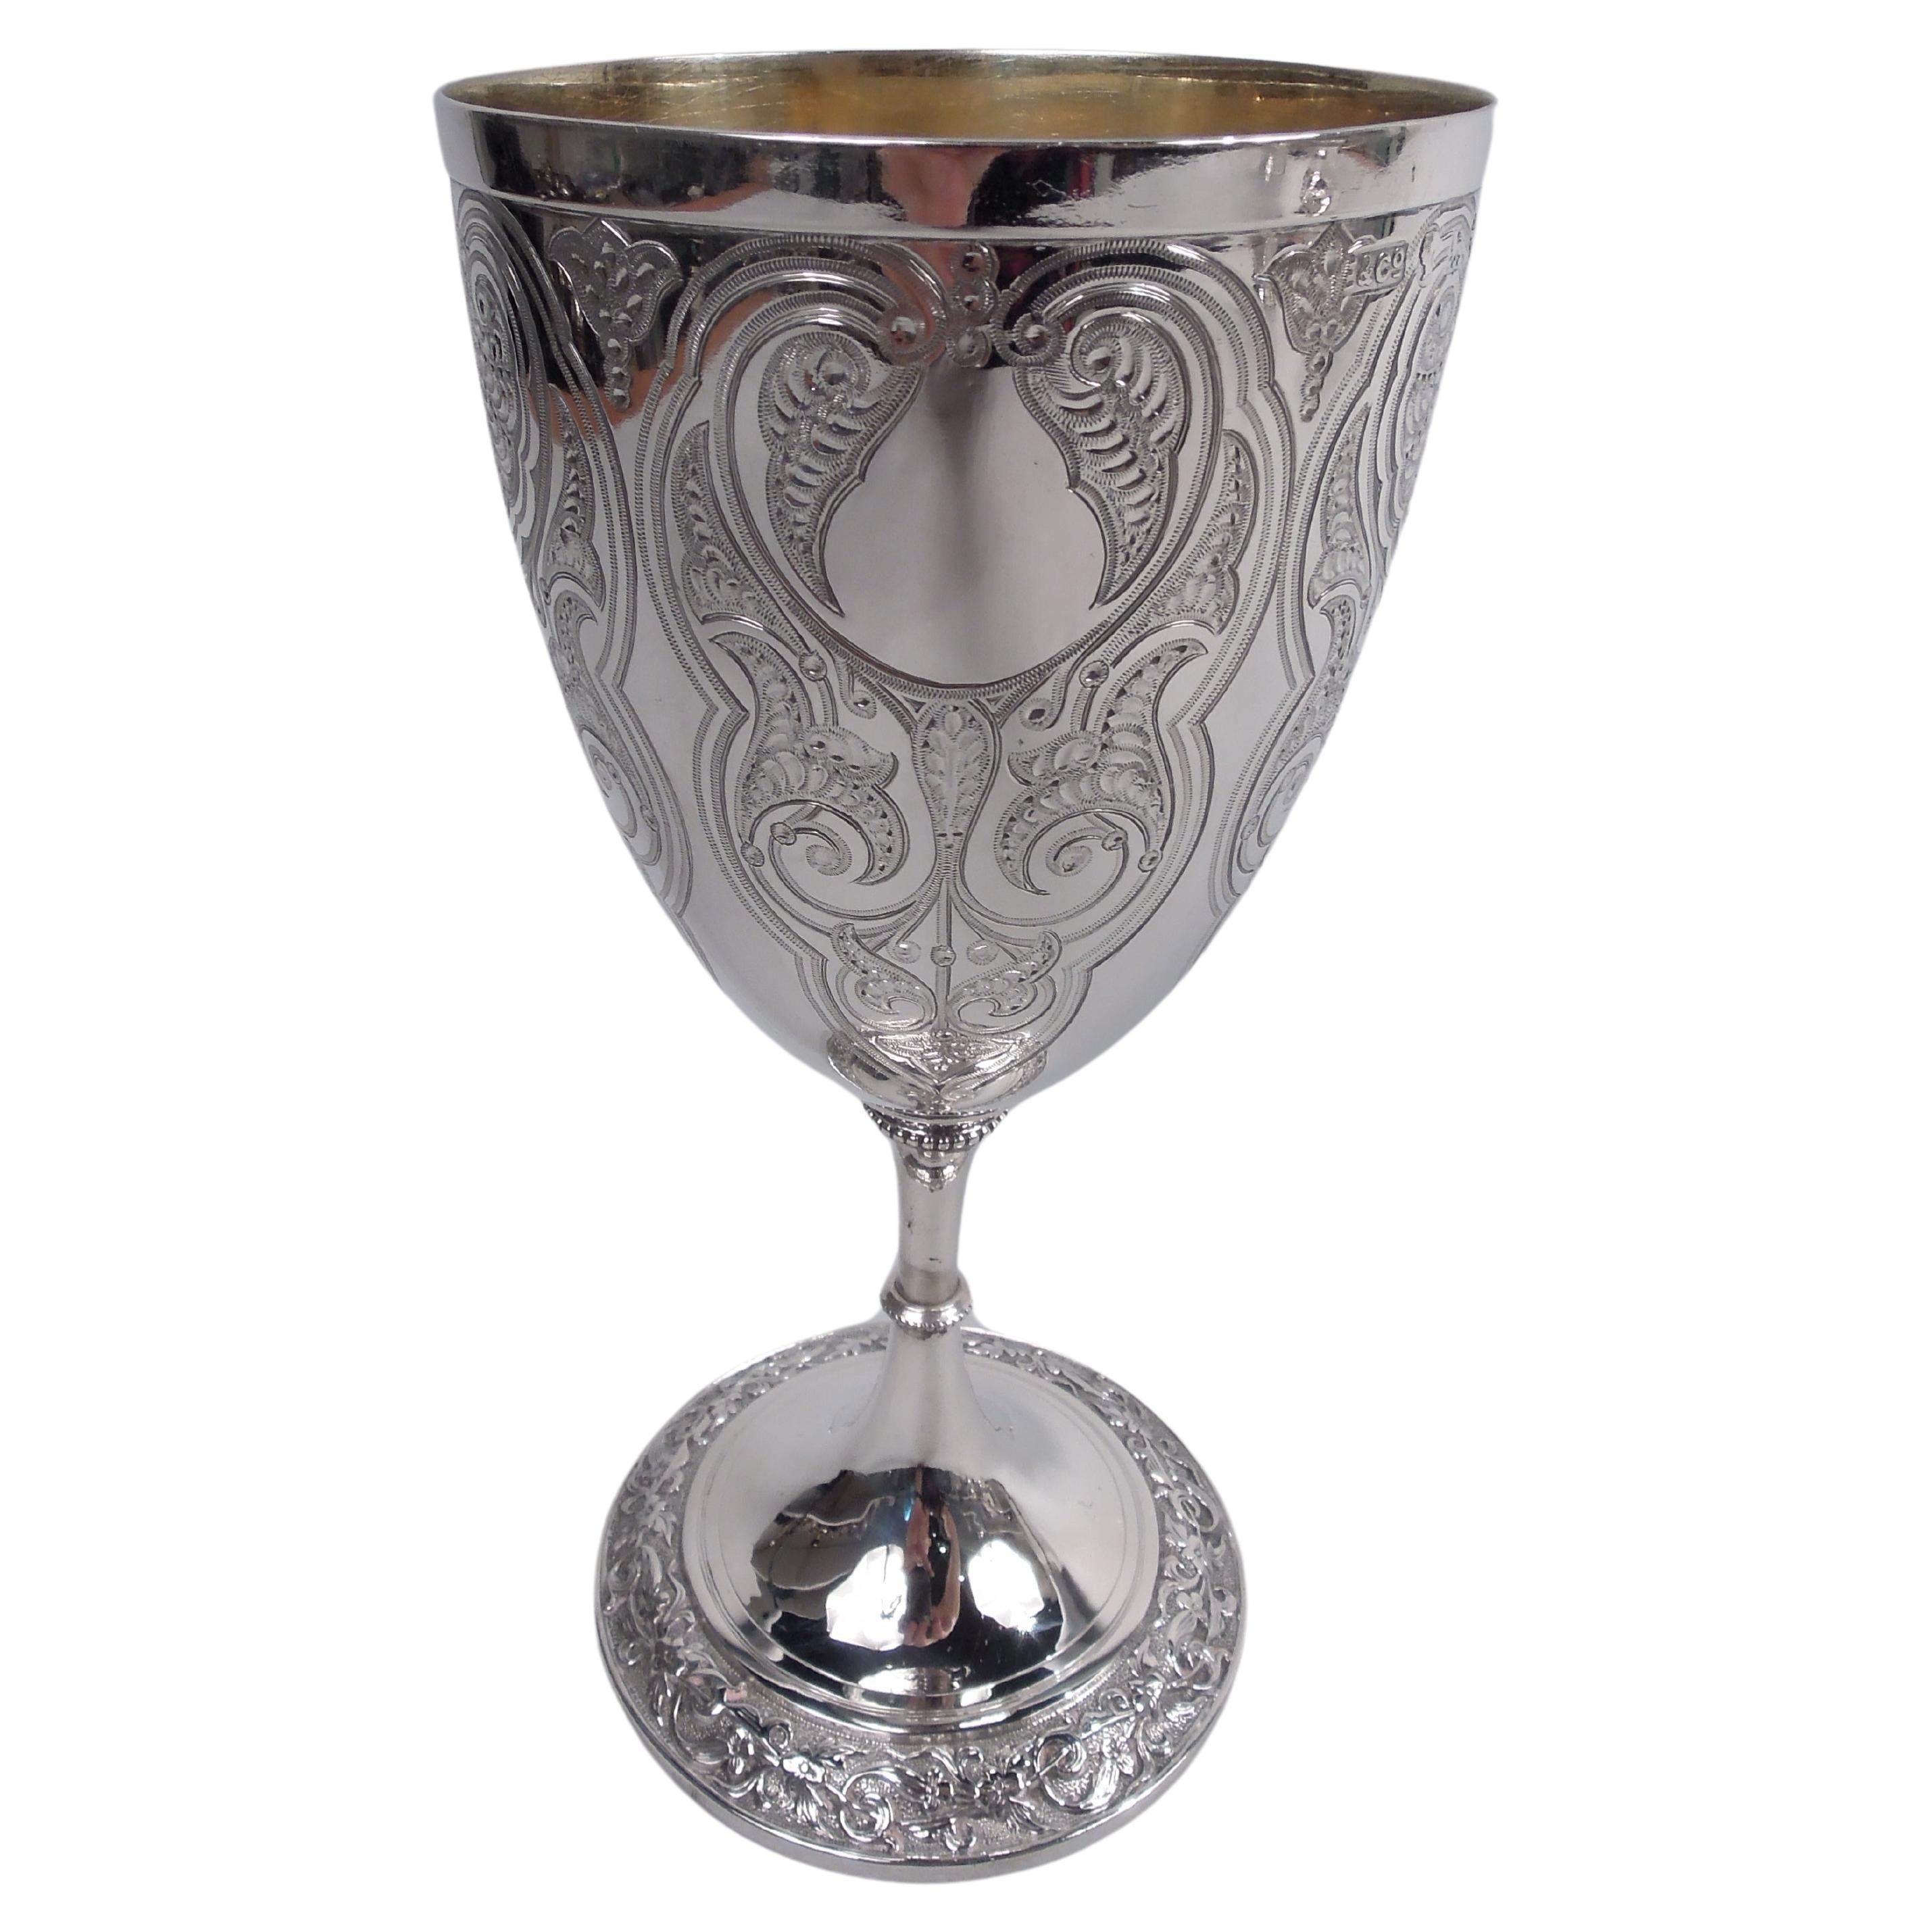 Elkington English Victorian Classical Sterling Silver Goblet, 1859